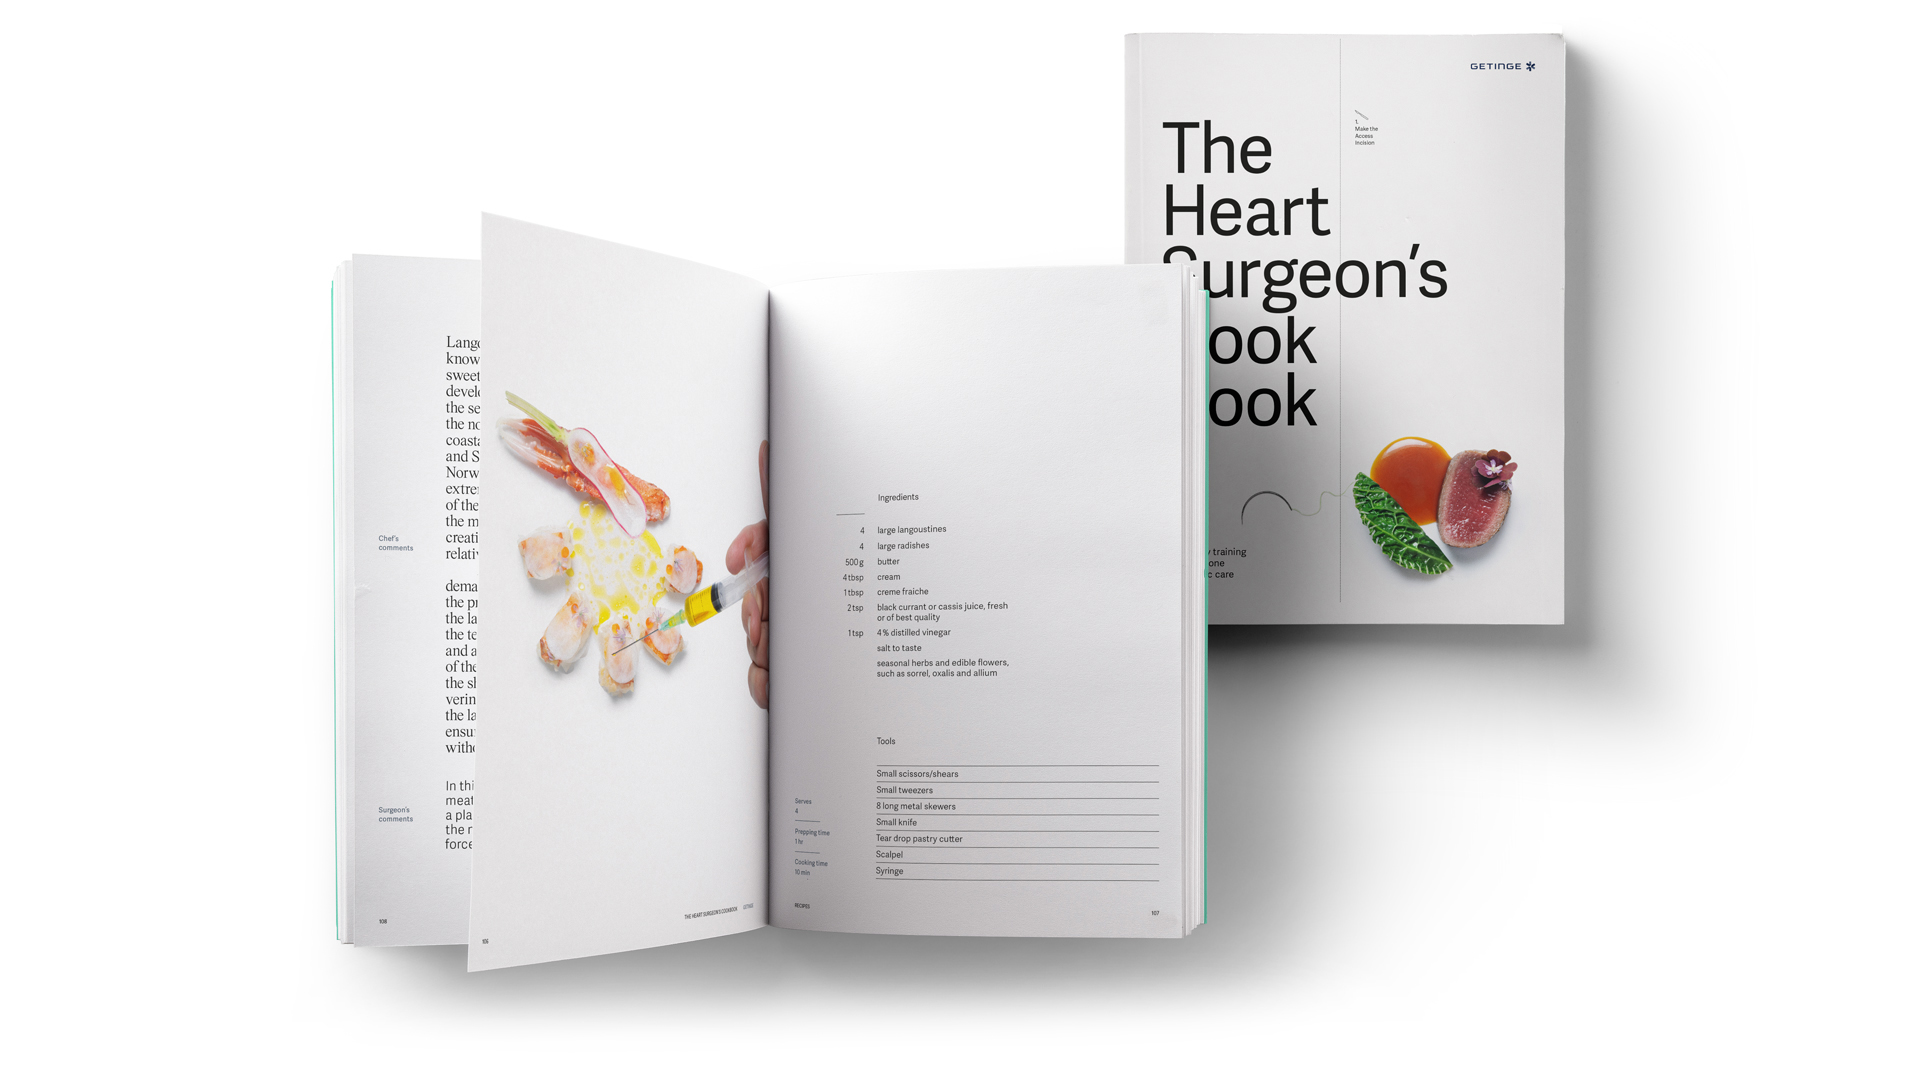 The Heart Surgeon’s Cookbook by Getinge